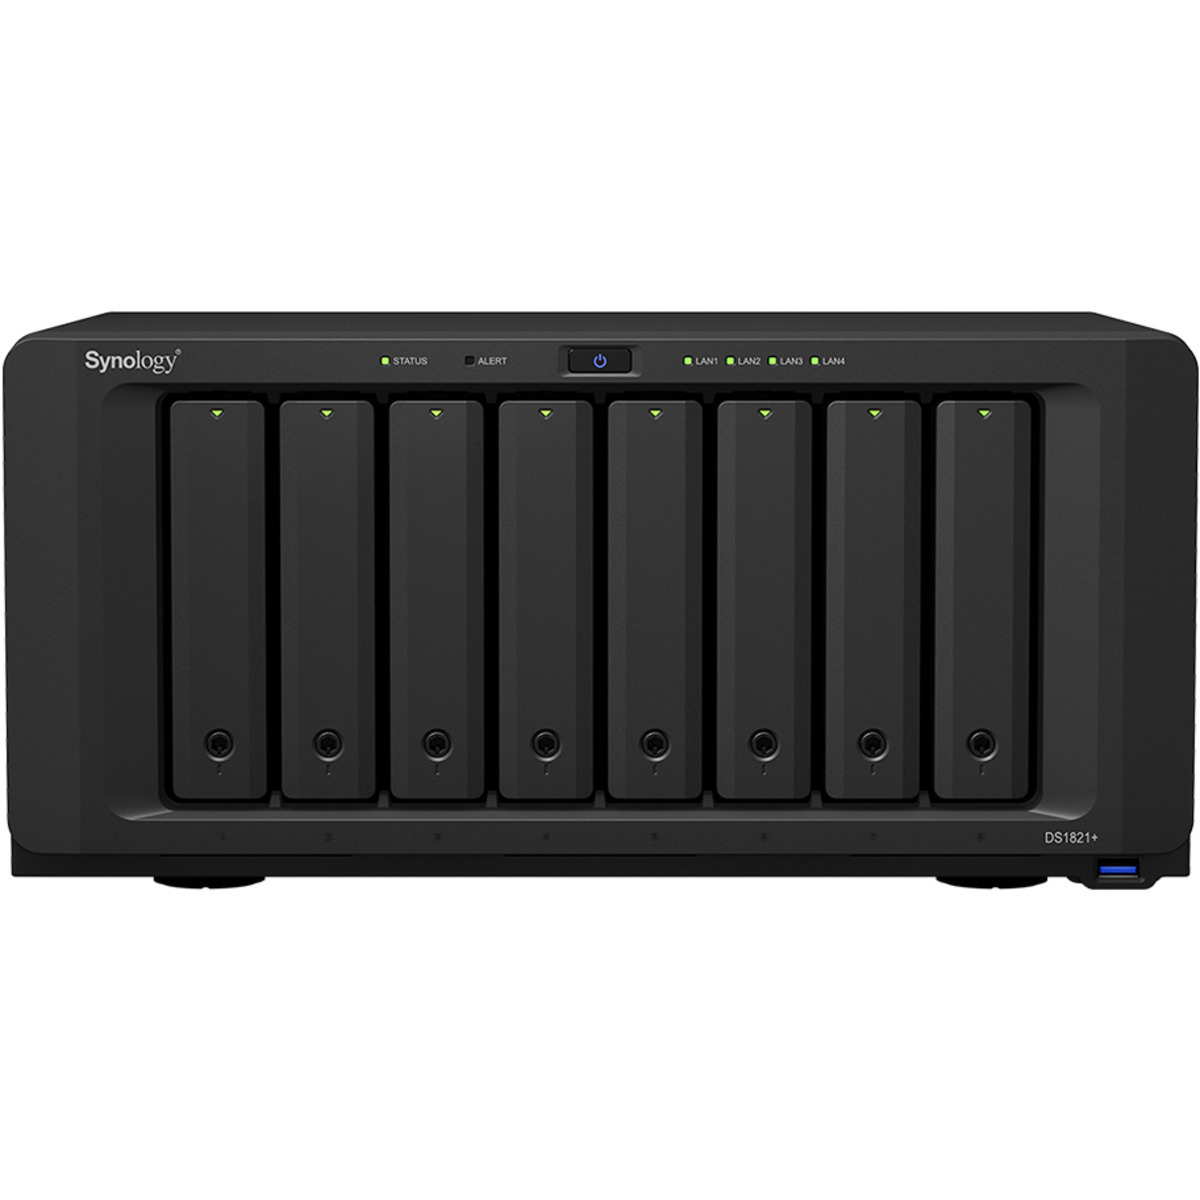 Synology DiskStation DS1821+ 128tb 8-Bay Desktop Multimedia / Power User / Business NAS - Network Attached Storage Device 8x16tb Seagate IronWolf Pro ST16000NT001 3.5 7200rpm SATA 6Gb/s HDD NAS Class Drives Installed - Burn-In Tested - ON SALE - FREE RAM UPGRADE DiskStation DS1821+